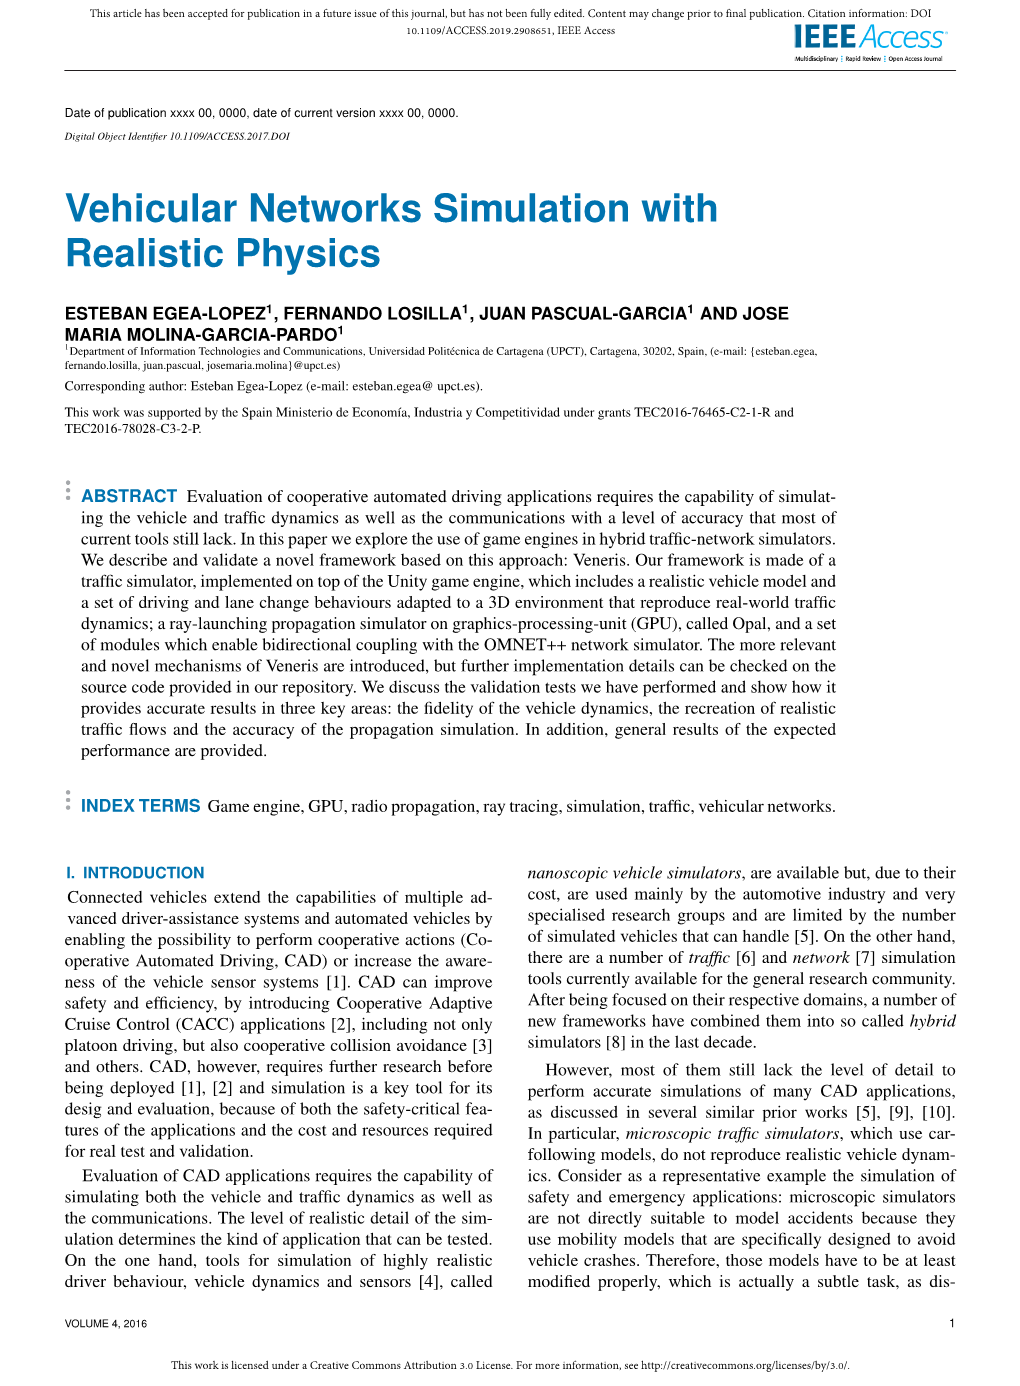 Here Are a Number of Trafﬁc [6] and Network [7] Simulation Ness of the Vehicle Sensor Systems [1]